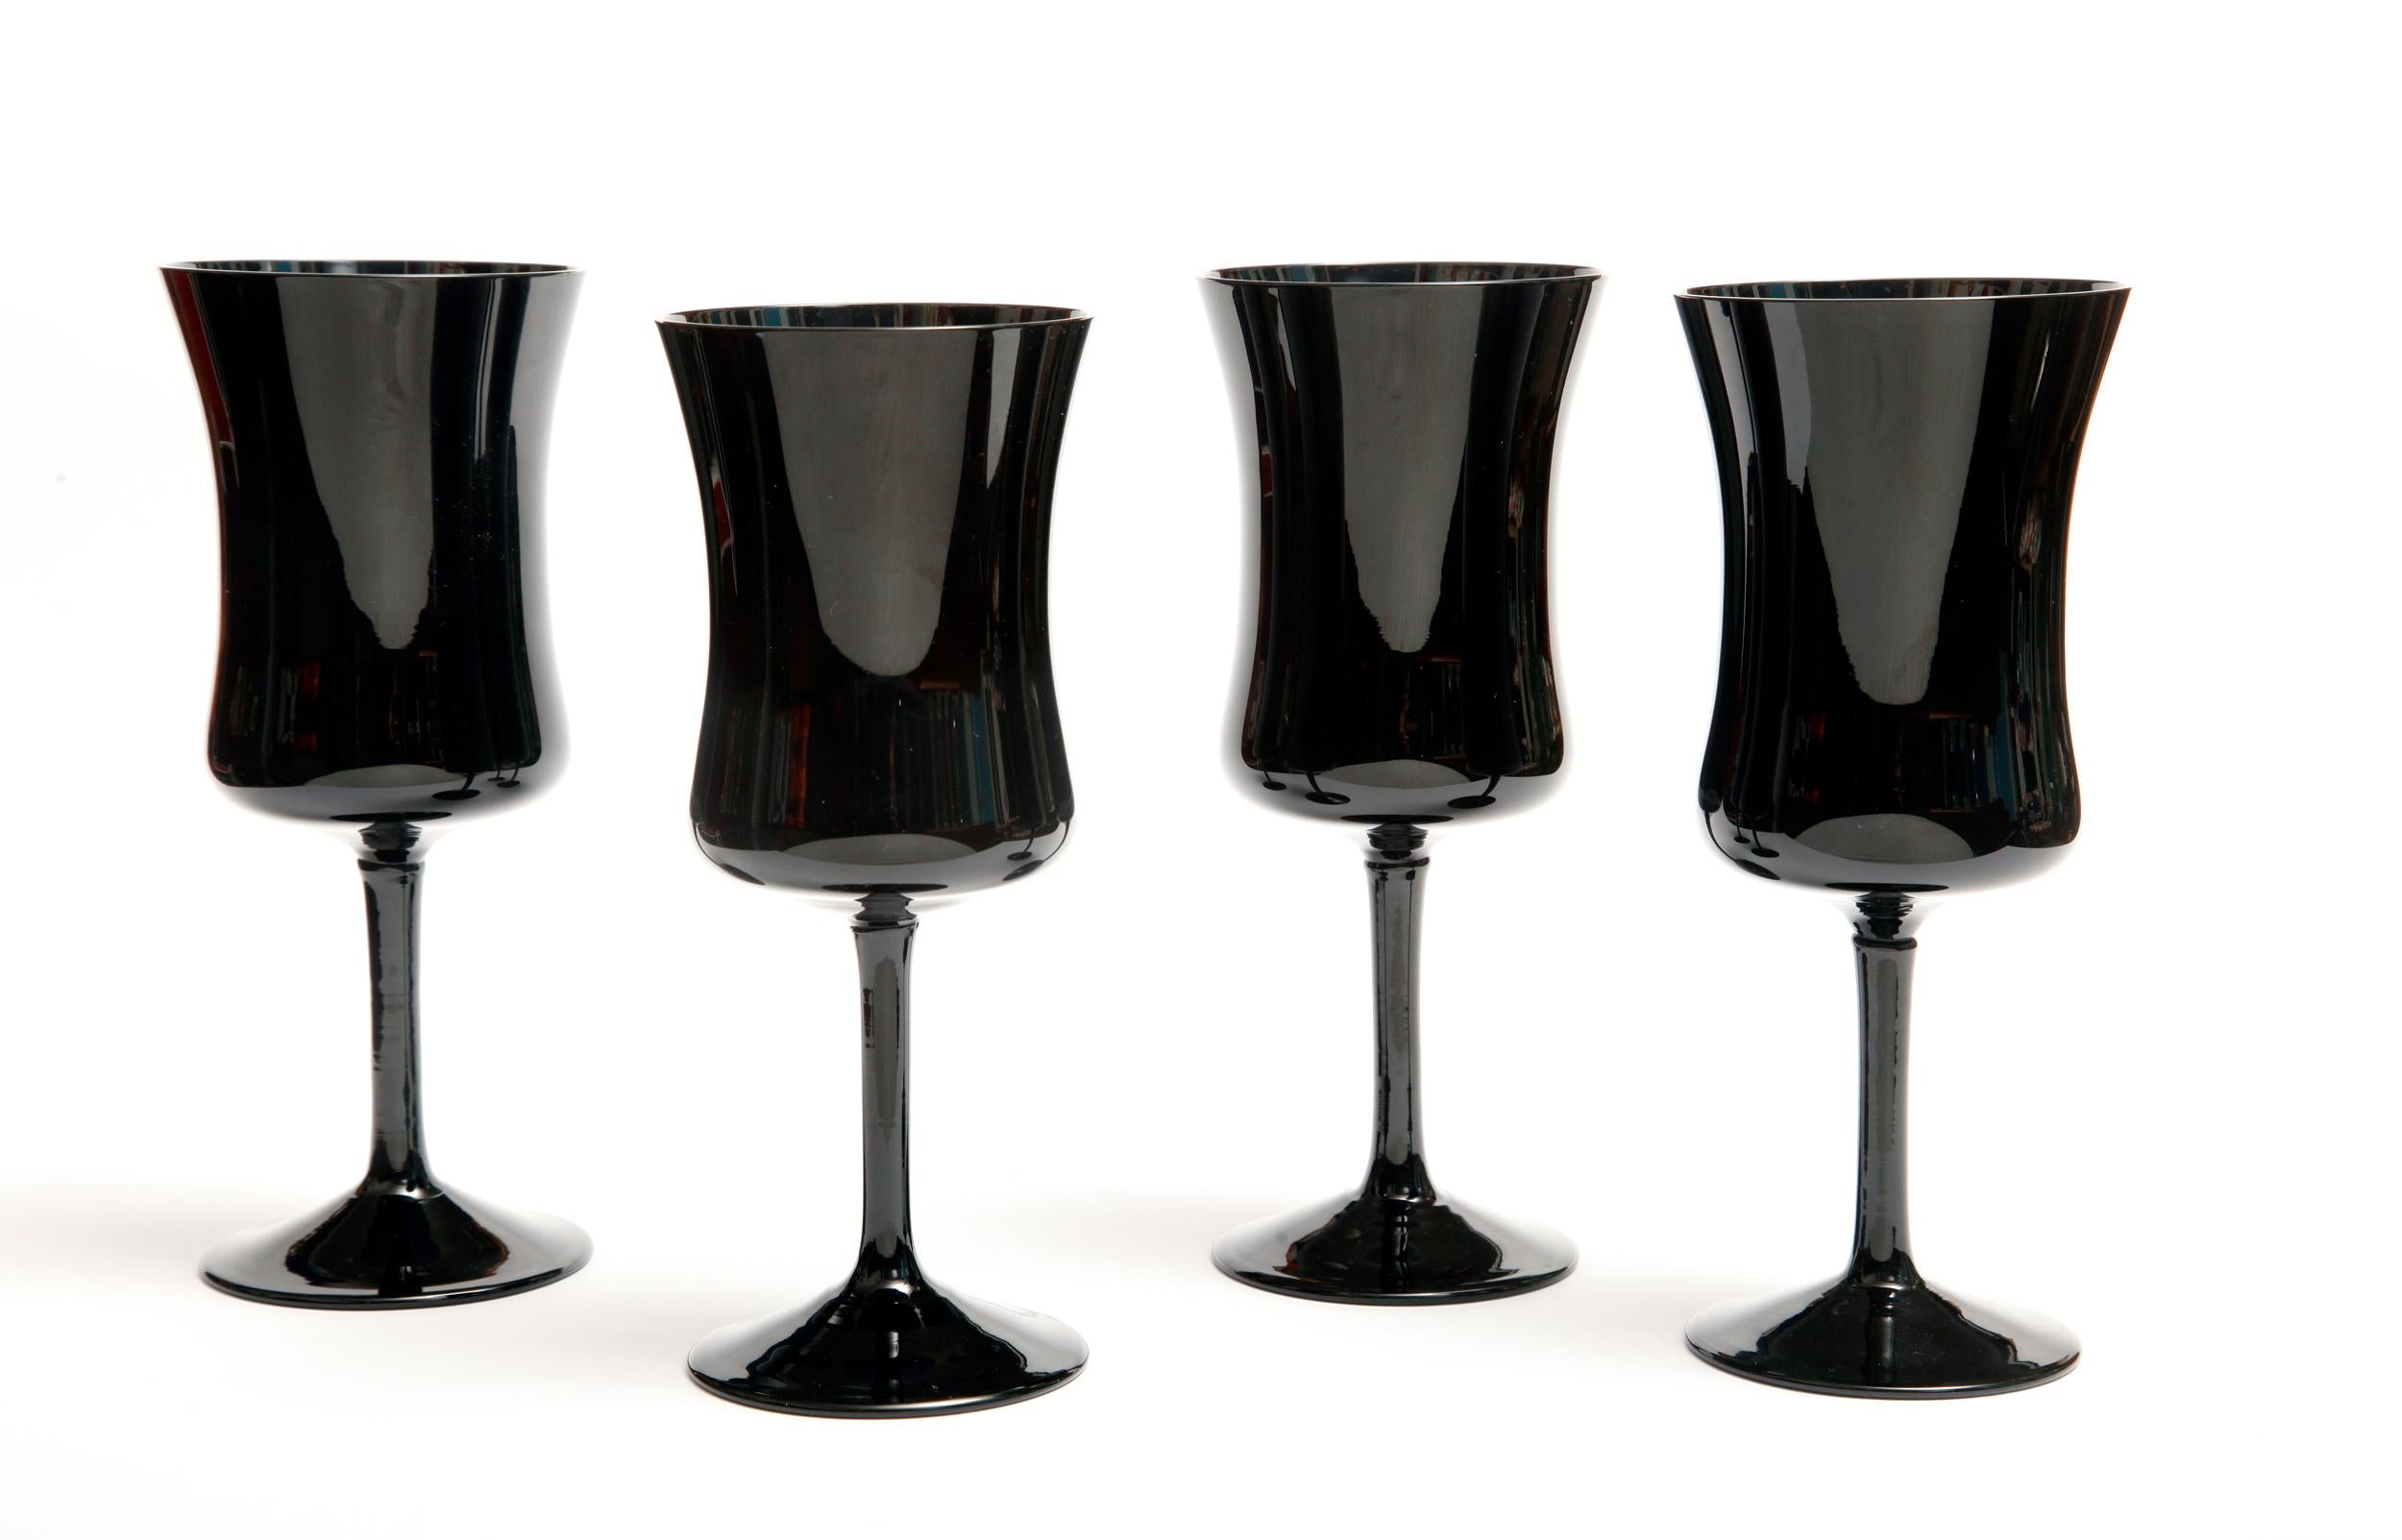 Four Black Elegant Glasses by Zbigniew Horbowy, Poland, 1970s In Excellent Condition For Sale In Warsaw, PL